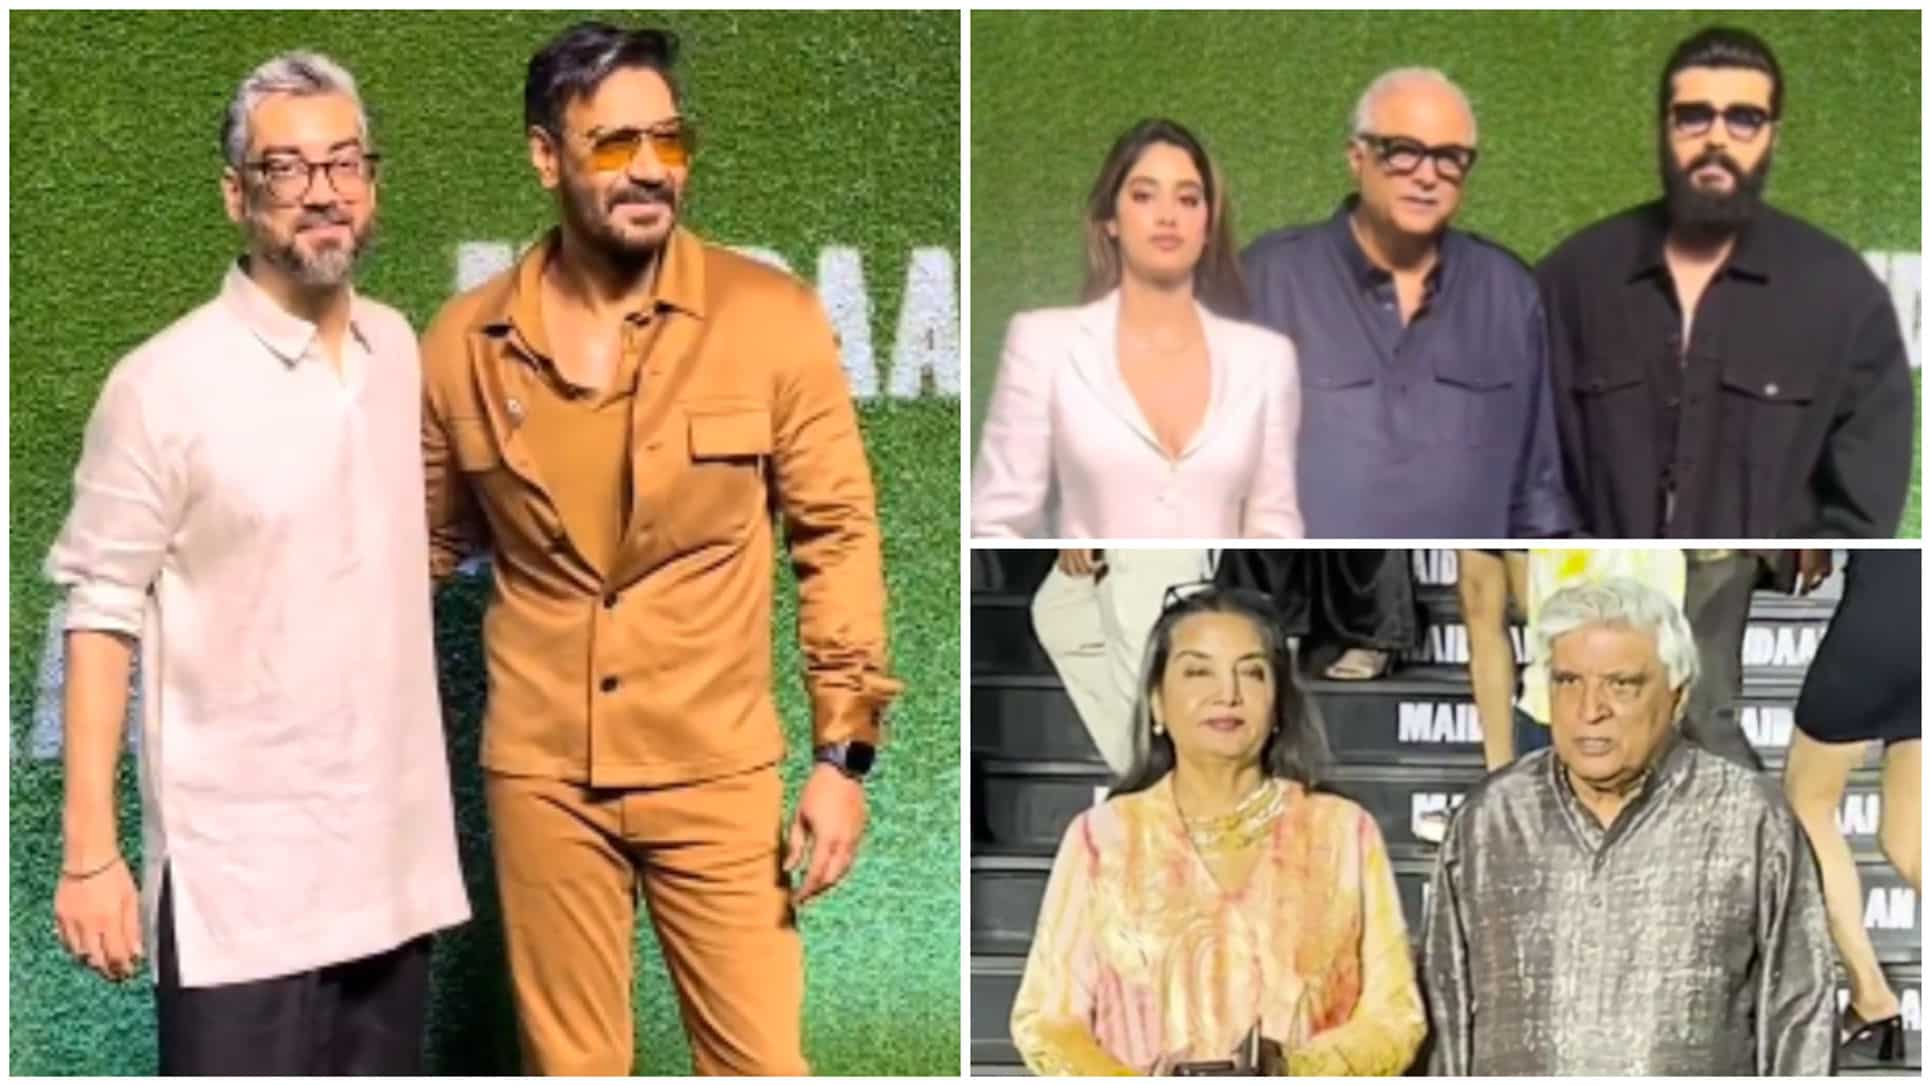 https://www.mobilemasala.com/fashion/Maidaan-screening-Ajay-Devgn-Javed-Akhtar-Janhvi-Kapoor-and-more-celebs-dazzle-in-style-Watch-i252493